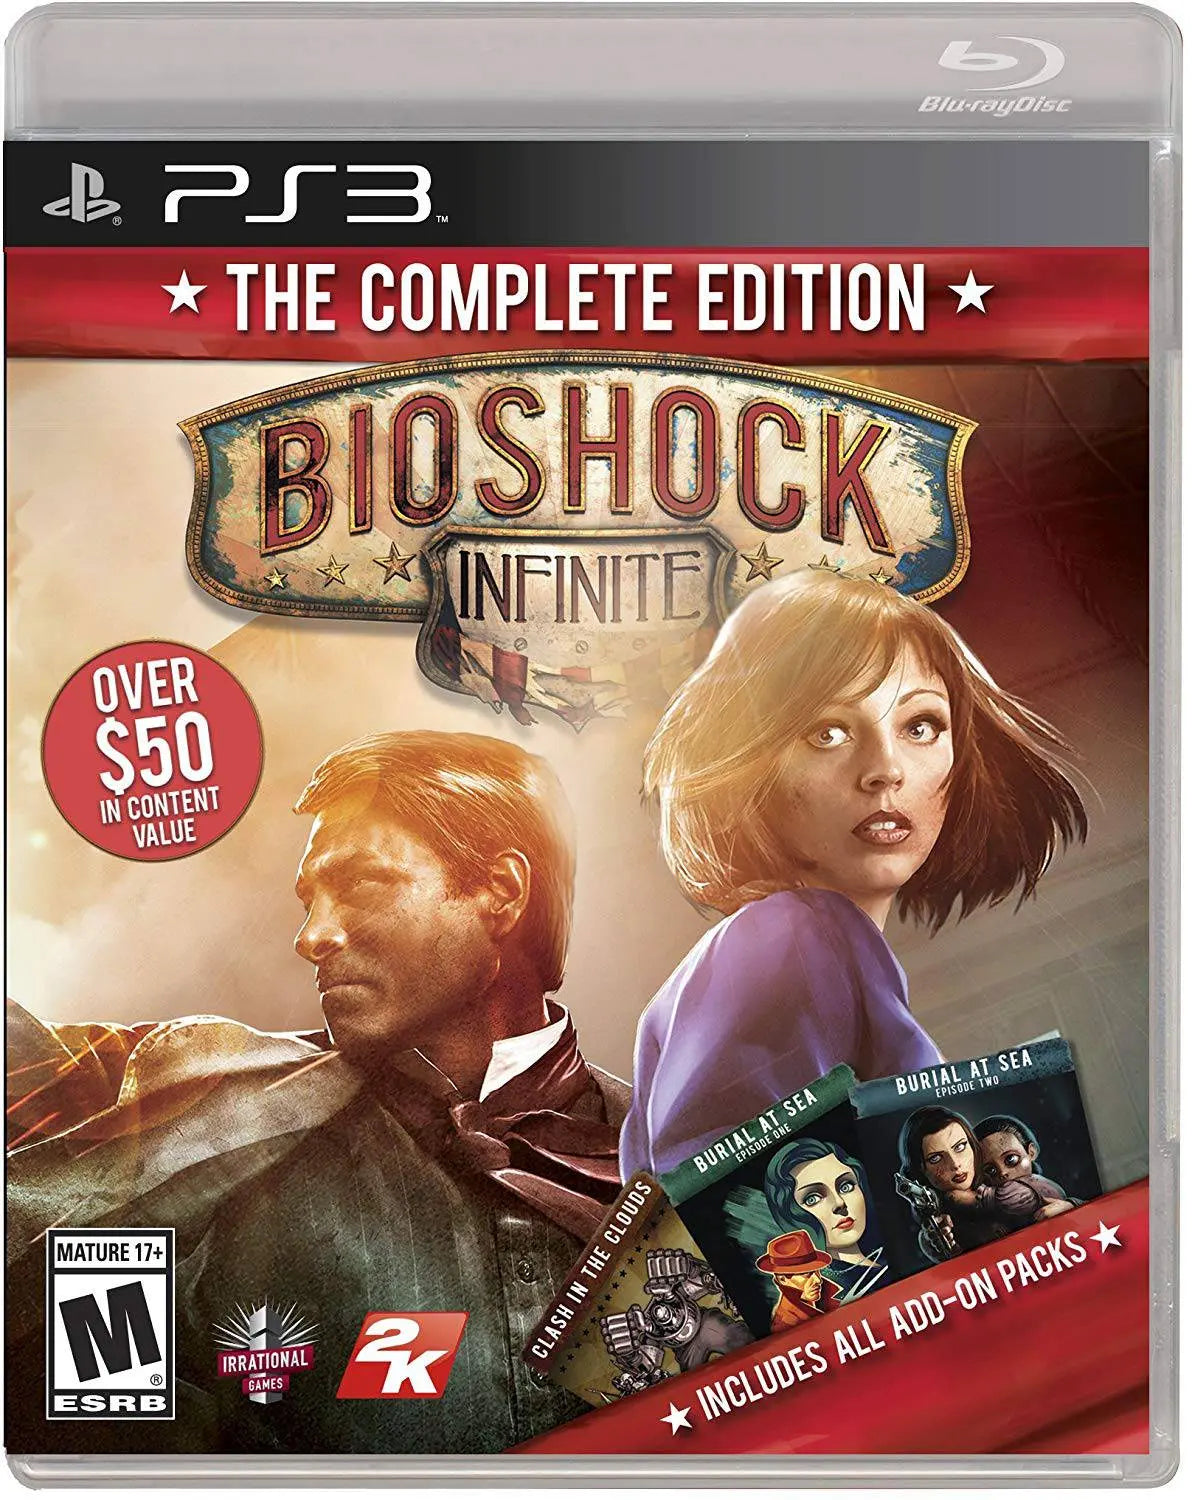 PS3 BIOSHOCK INFINITE: THE COMPLETE EDITION - Used King Gaming